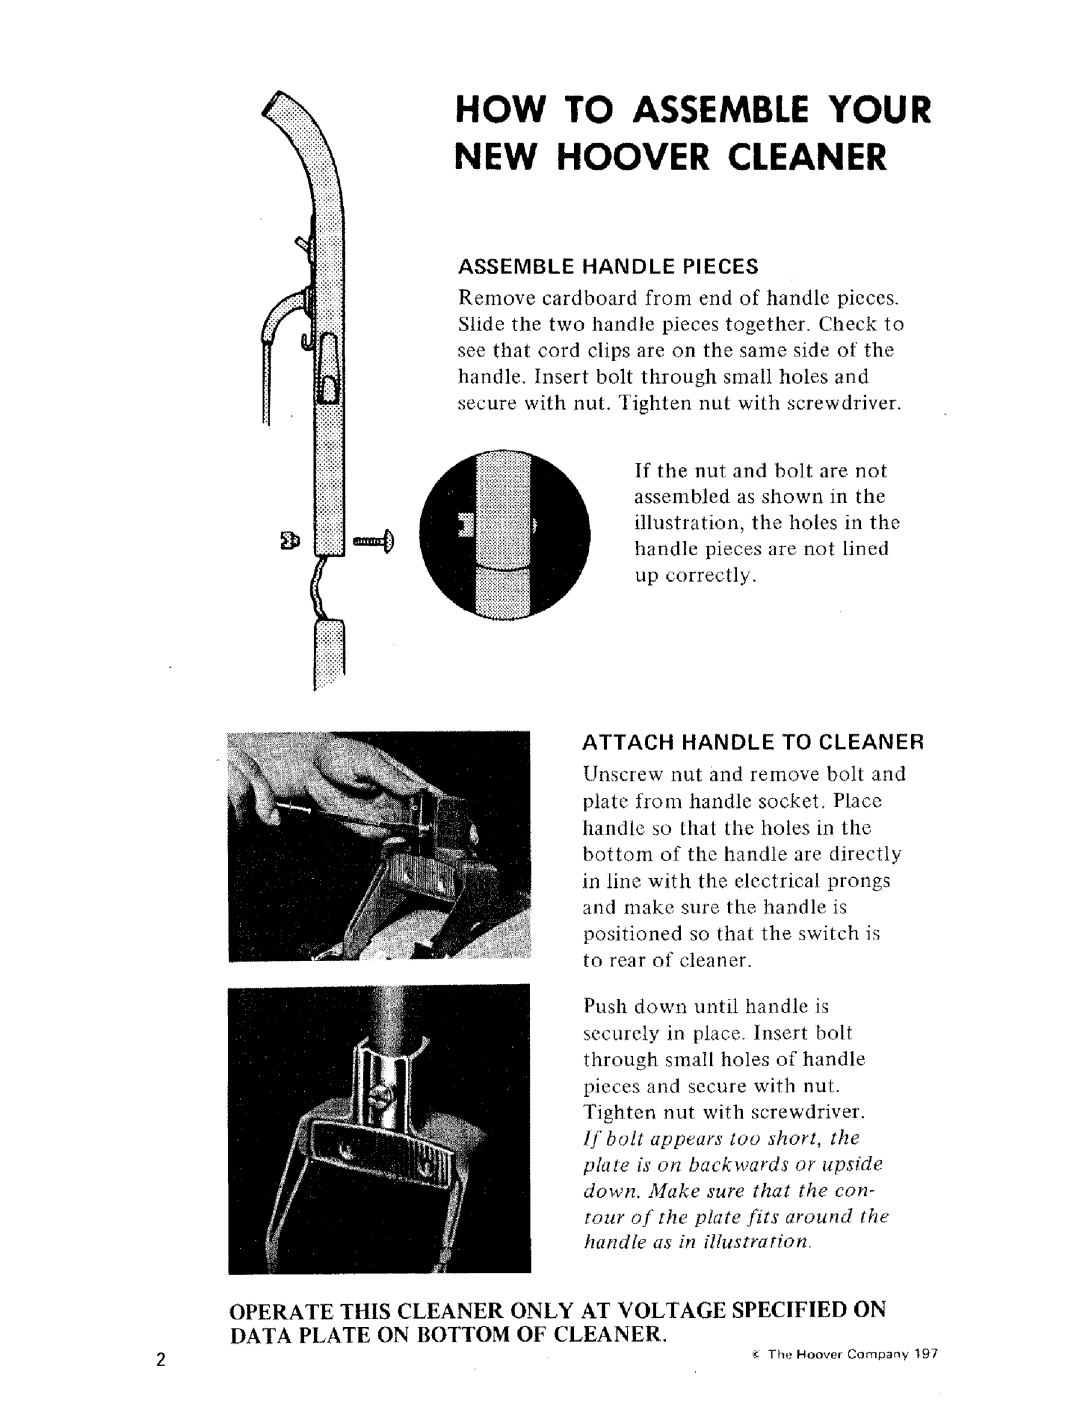 Hoover U4001 owner manual How To Assemble Your New Hoover Cleaner, Assemble Handle Pieces, Attach Handle To Cleaner 